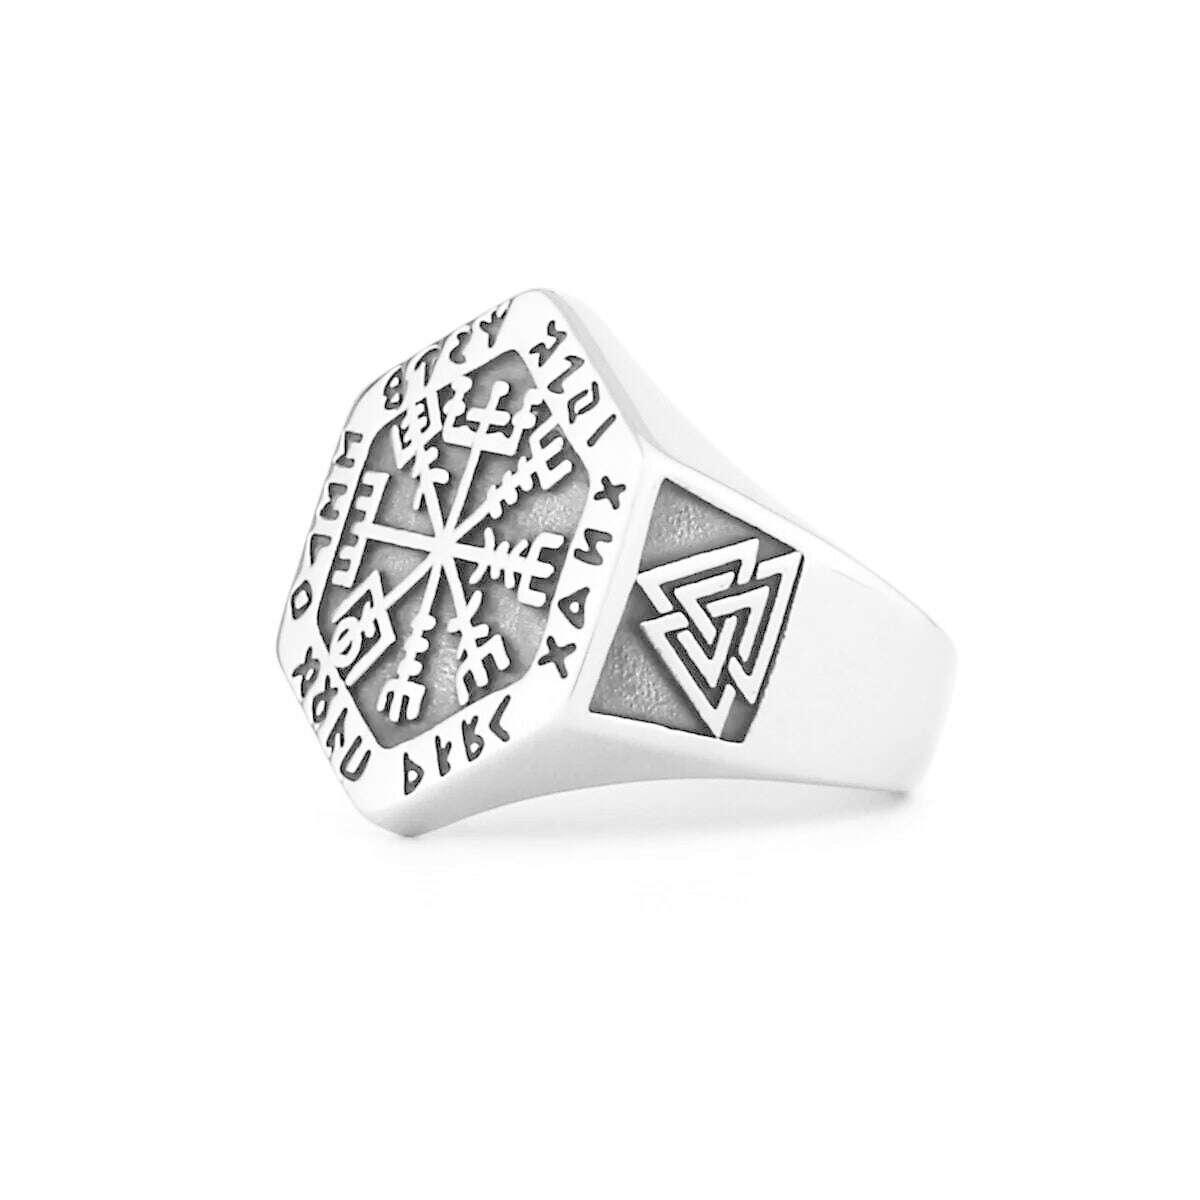 KIMLUD, Nordic Celtics Knotwork Viking Tree of Life Yggdrasil Ring For Men Vintage Stainless Steel Viking Ring Amulet Jewelry Gift, 9 / Chocolate Color / China, KIMLUD Womens Clothes